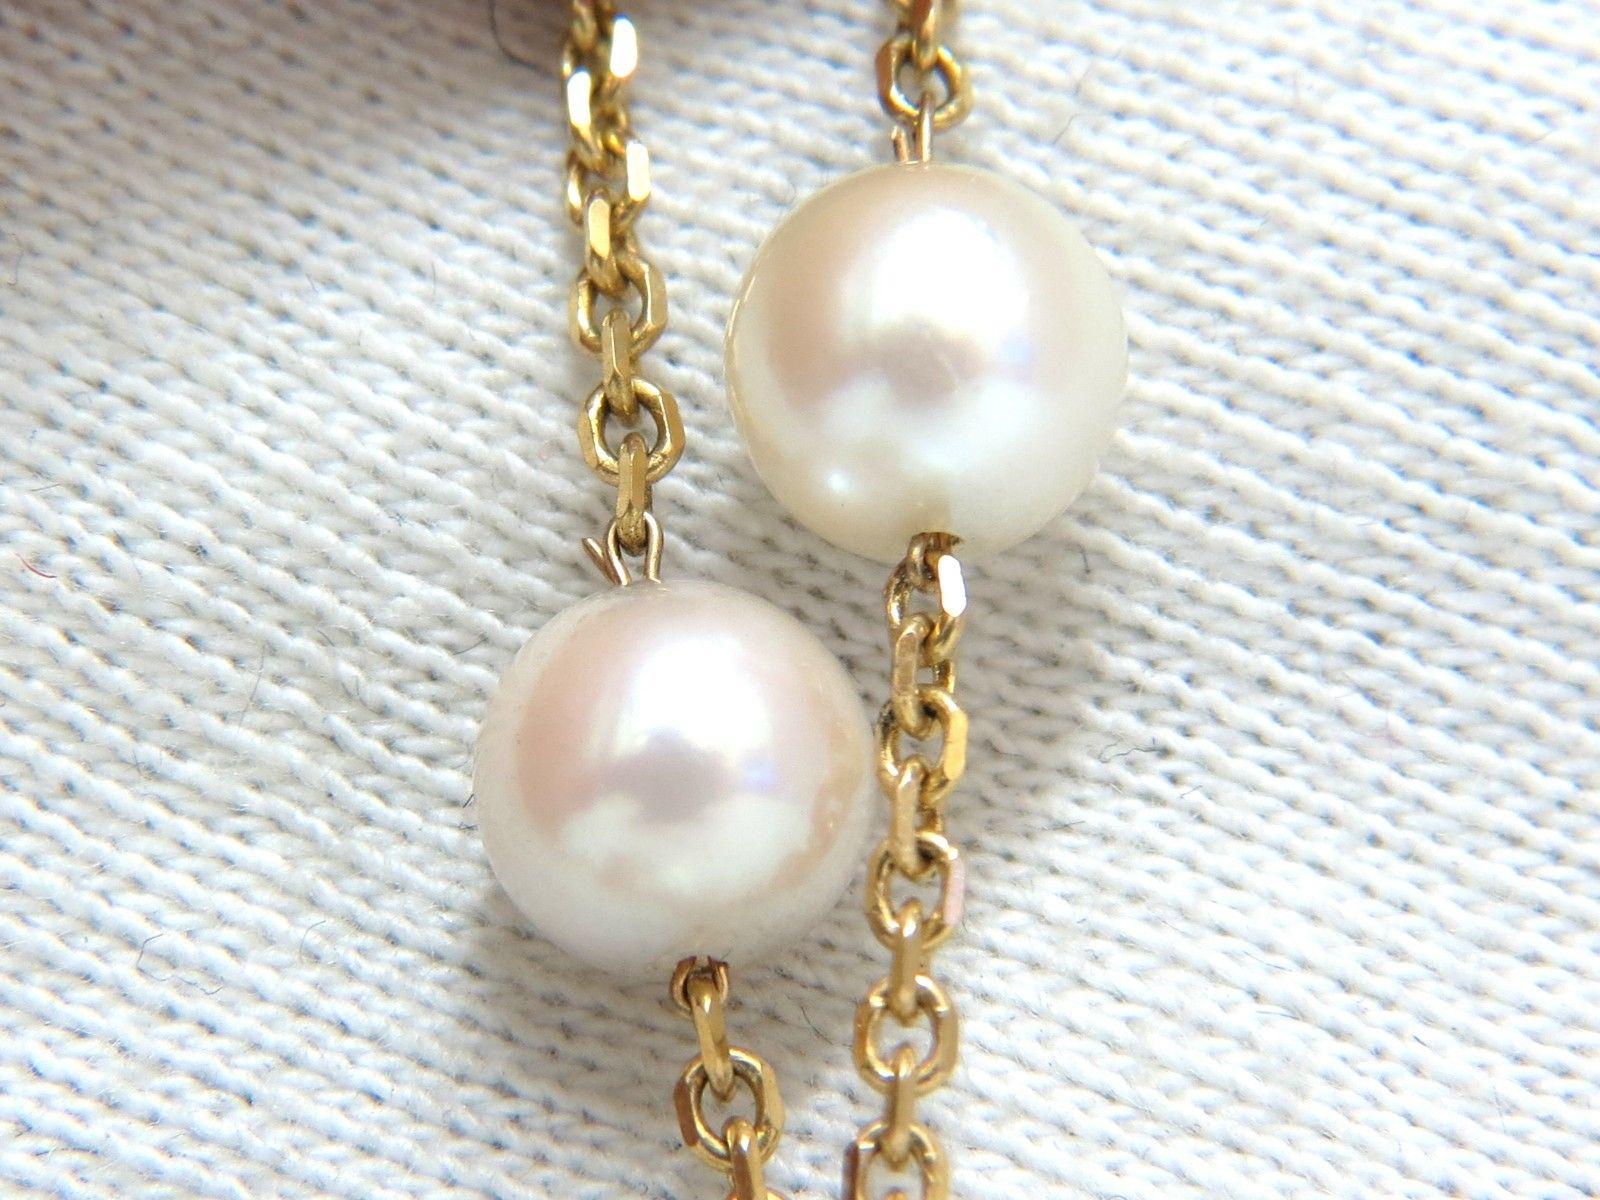 Every Day Classics.

7.3mm Cultured Pearls Yard Necklace

Necklace: 18 inch long.

10 Pearls

8.5 Grams  

14kt. yellow gold.